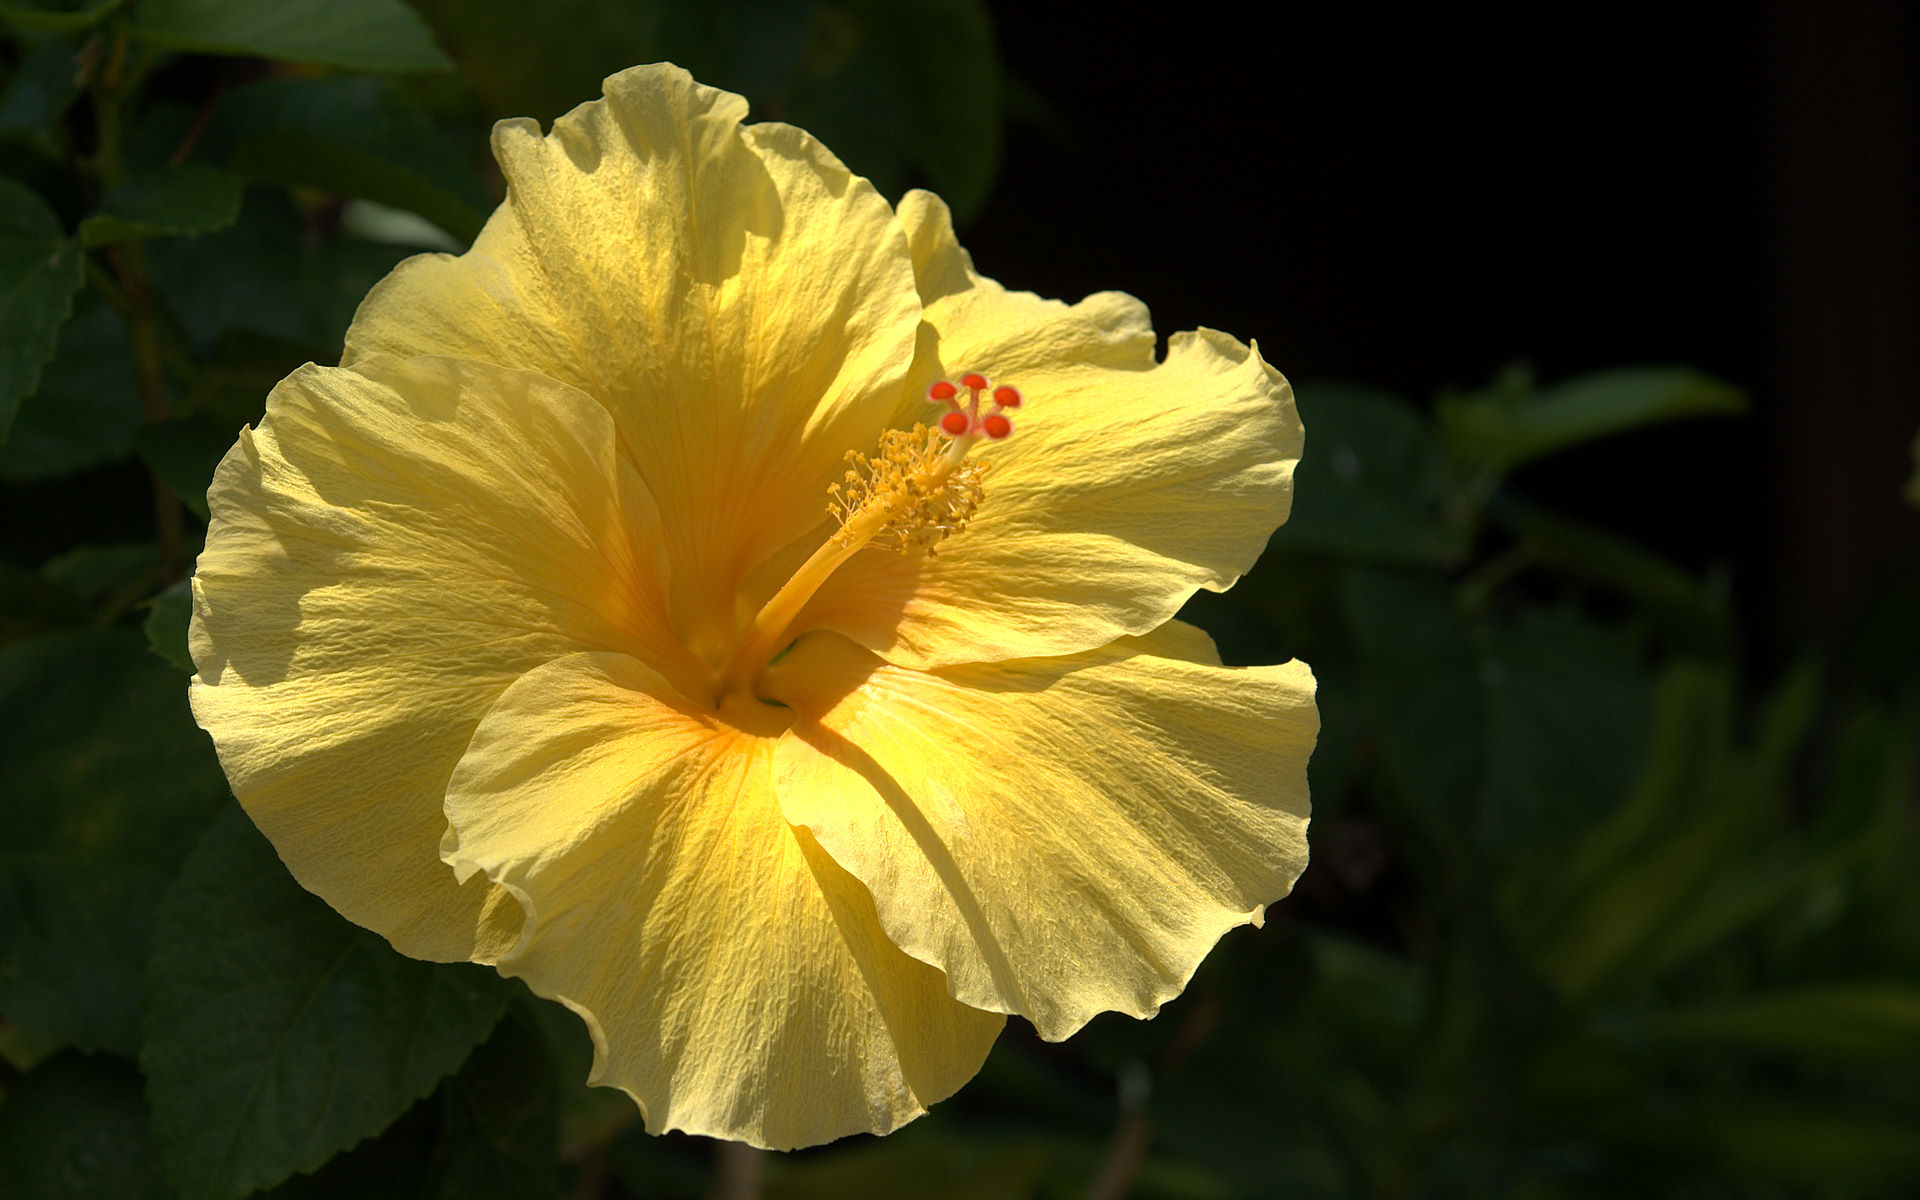  up of hibiscus in high resolution photo ready for your desktop wallpaper 